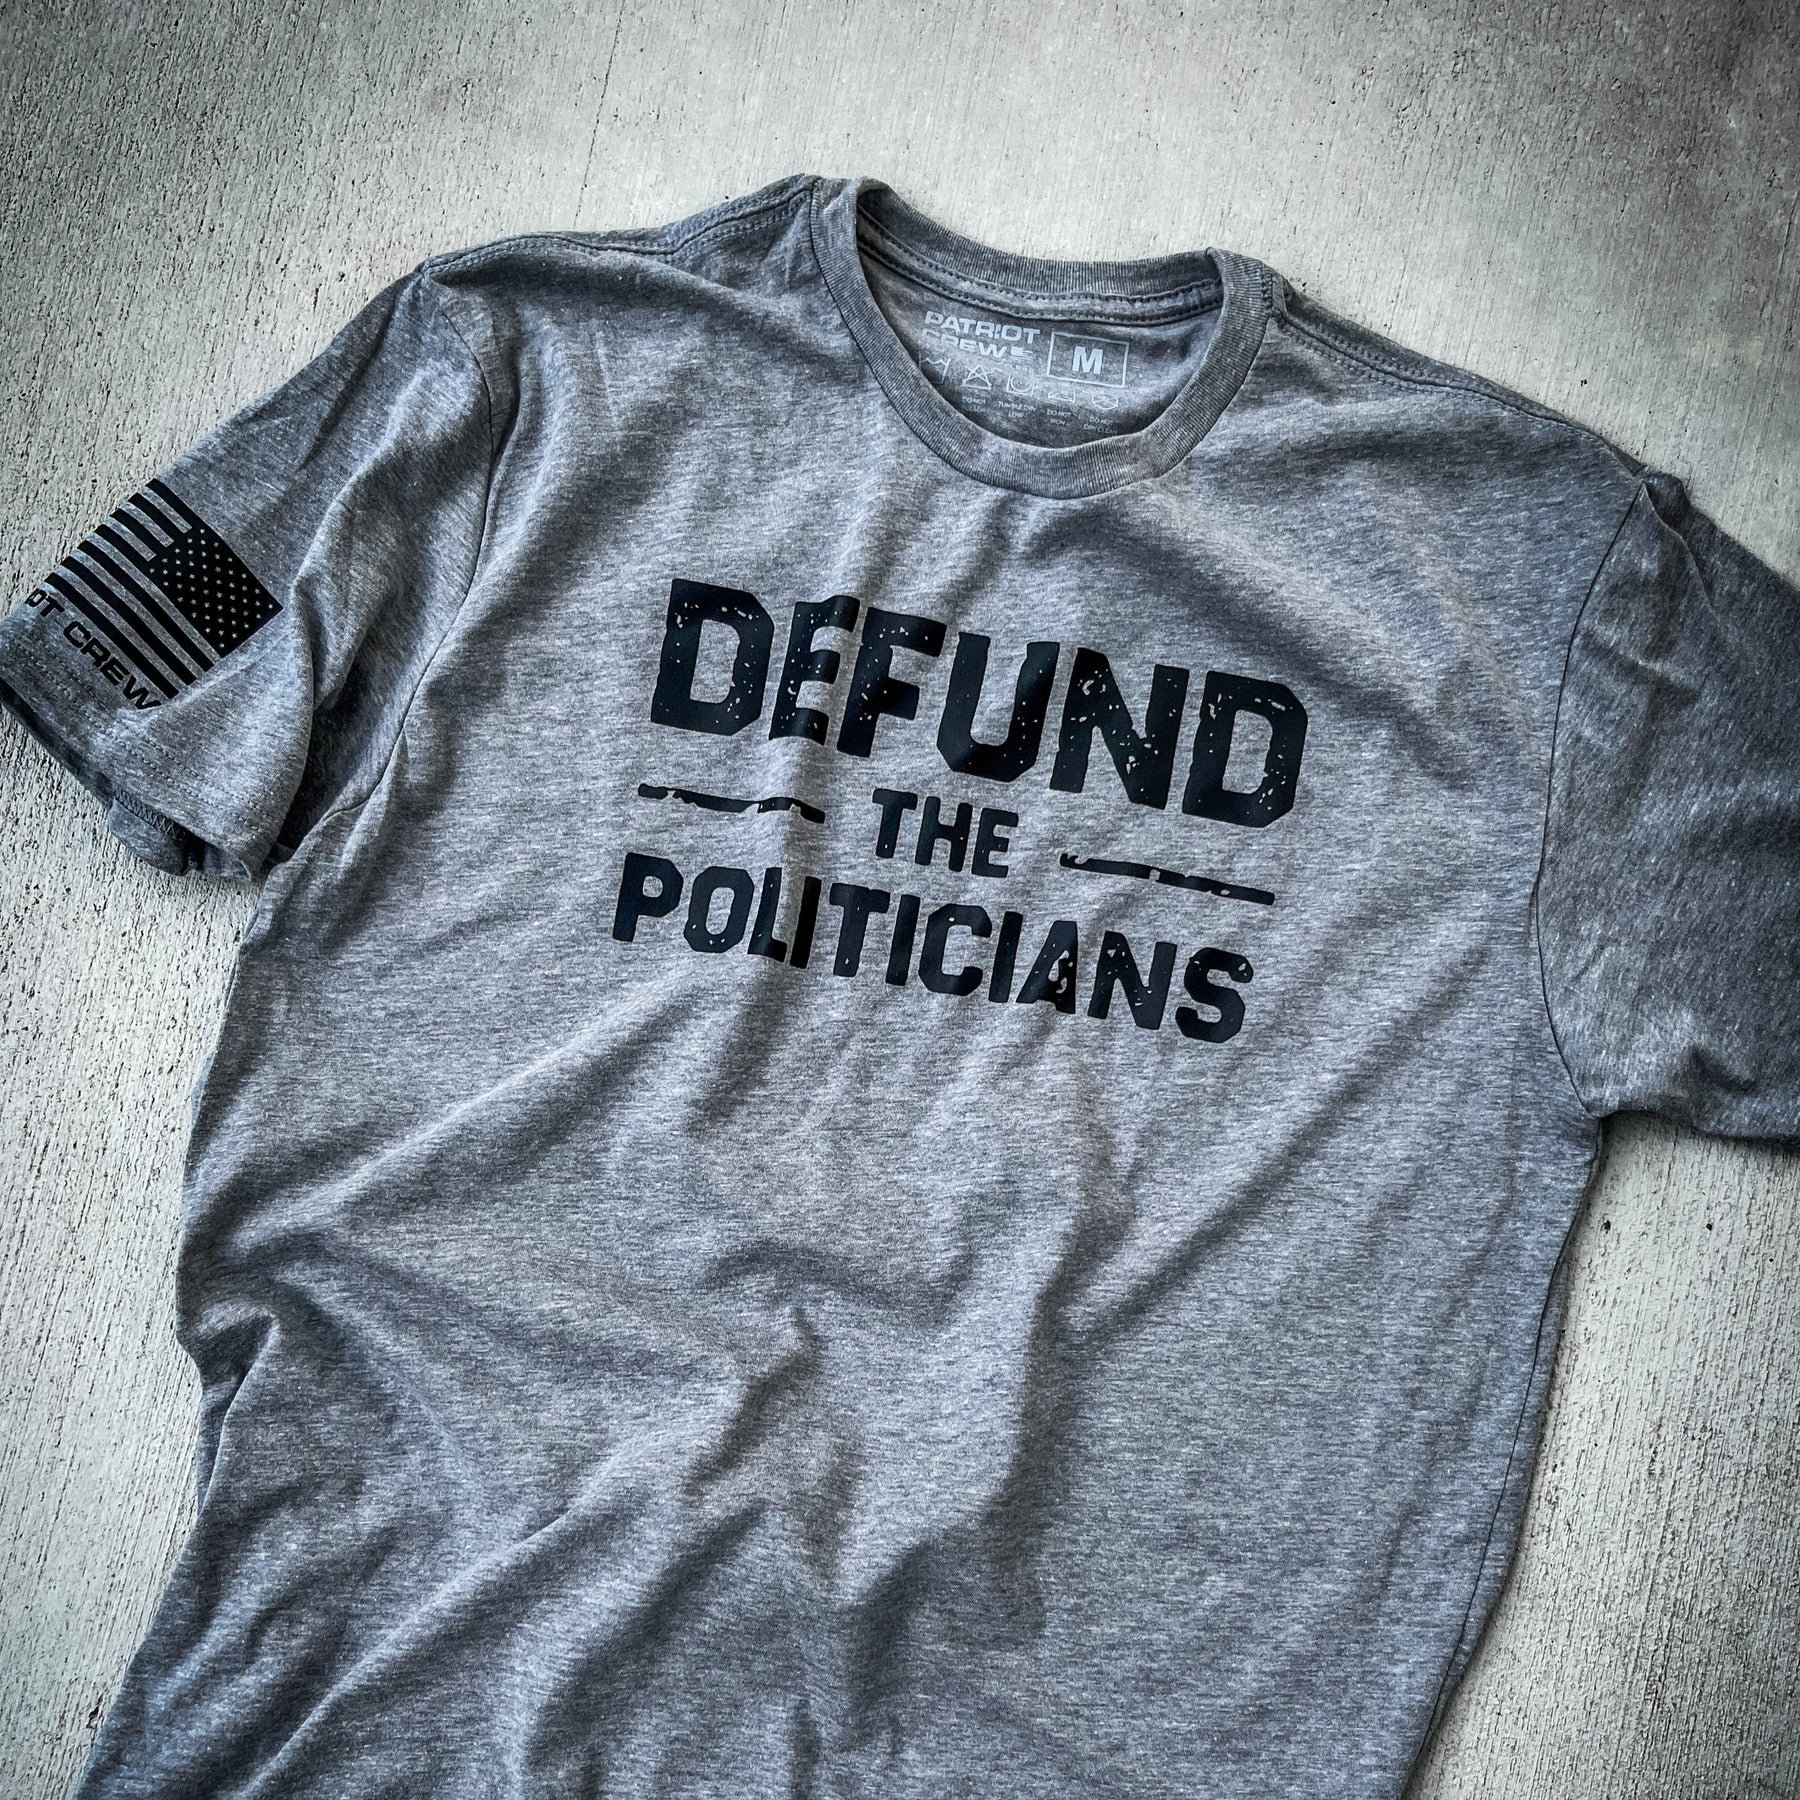 Defund The Politicians T-Shirt